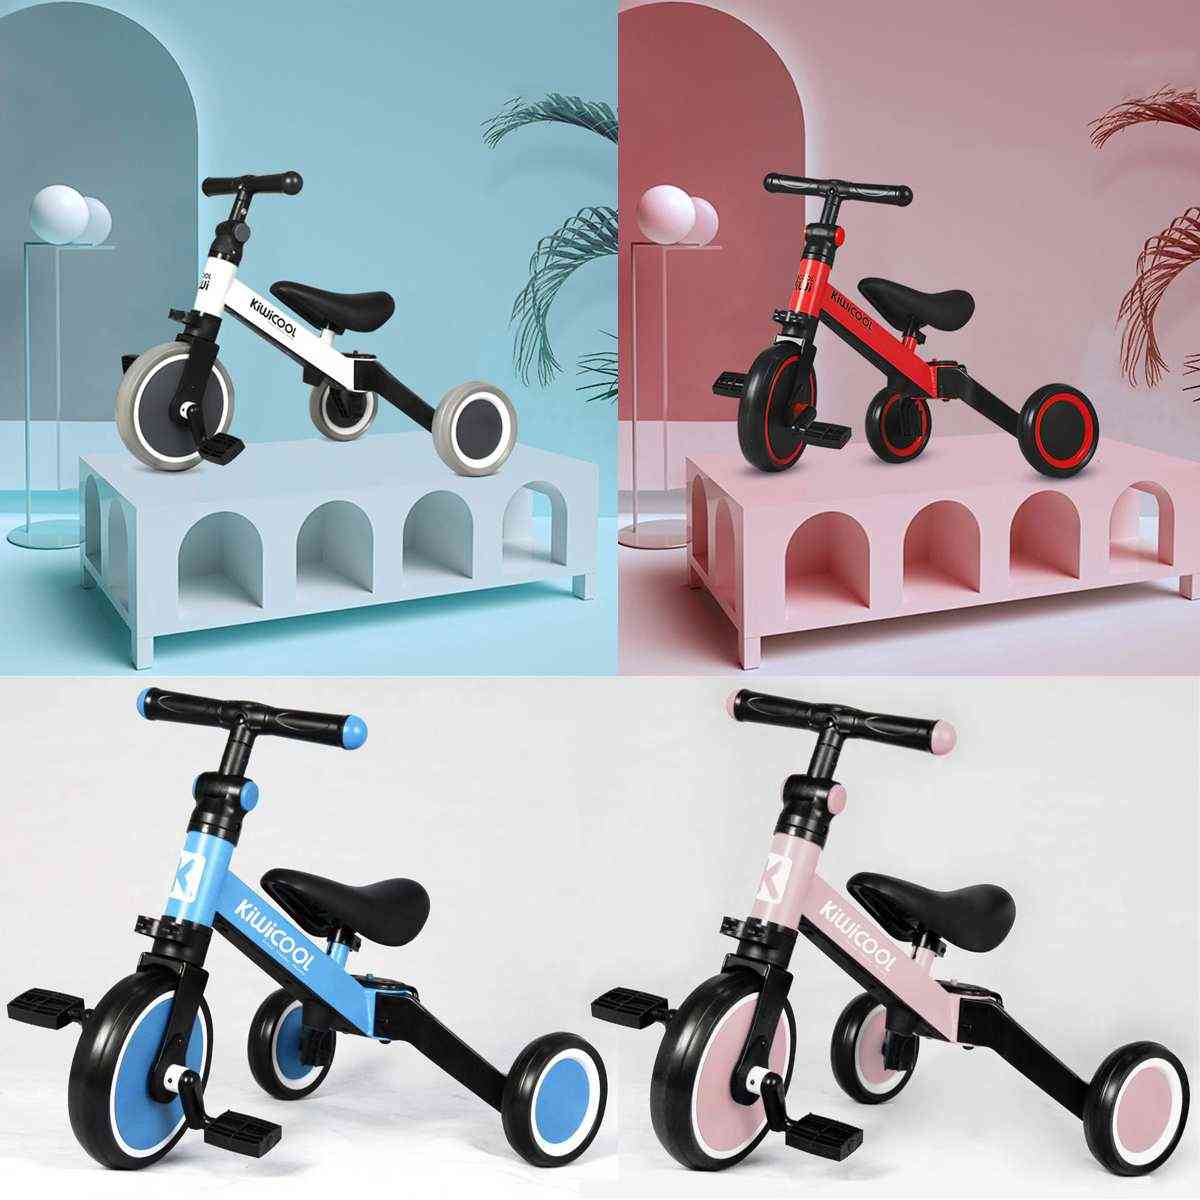 Deformable Scooter Tricycle, 3 In 1 Design, Balance Bicycle Ride On Bike For Baby